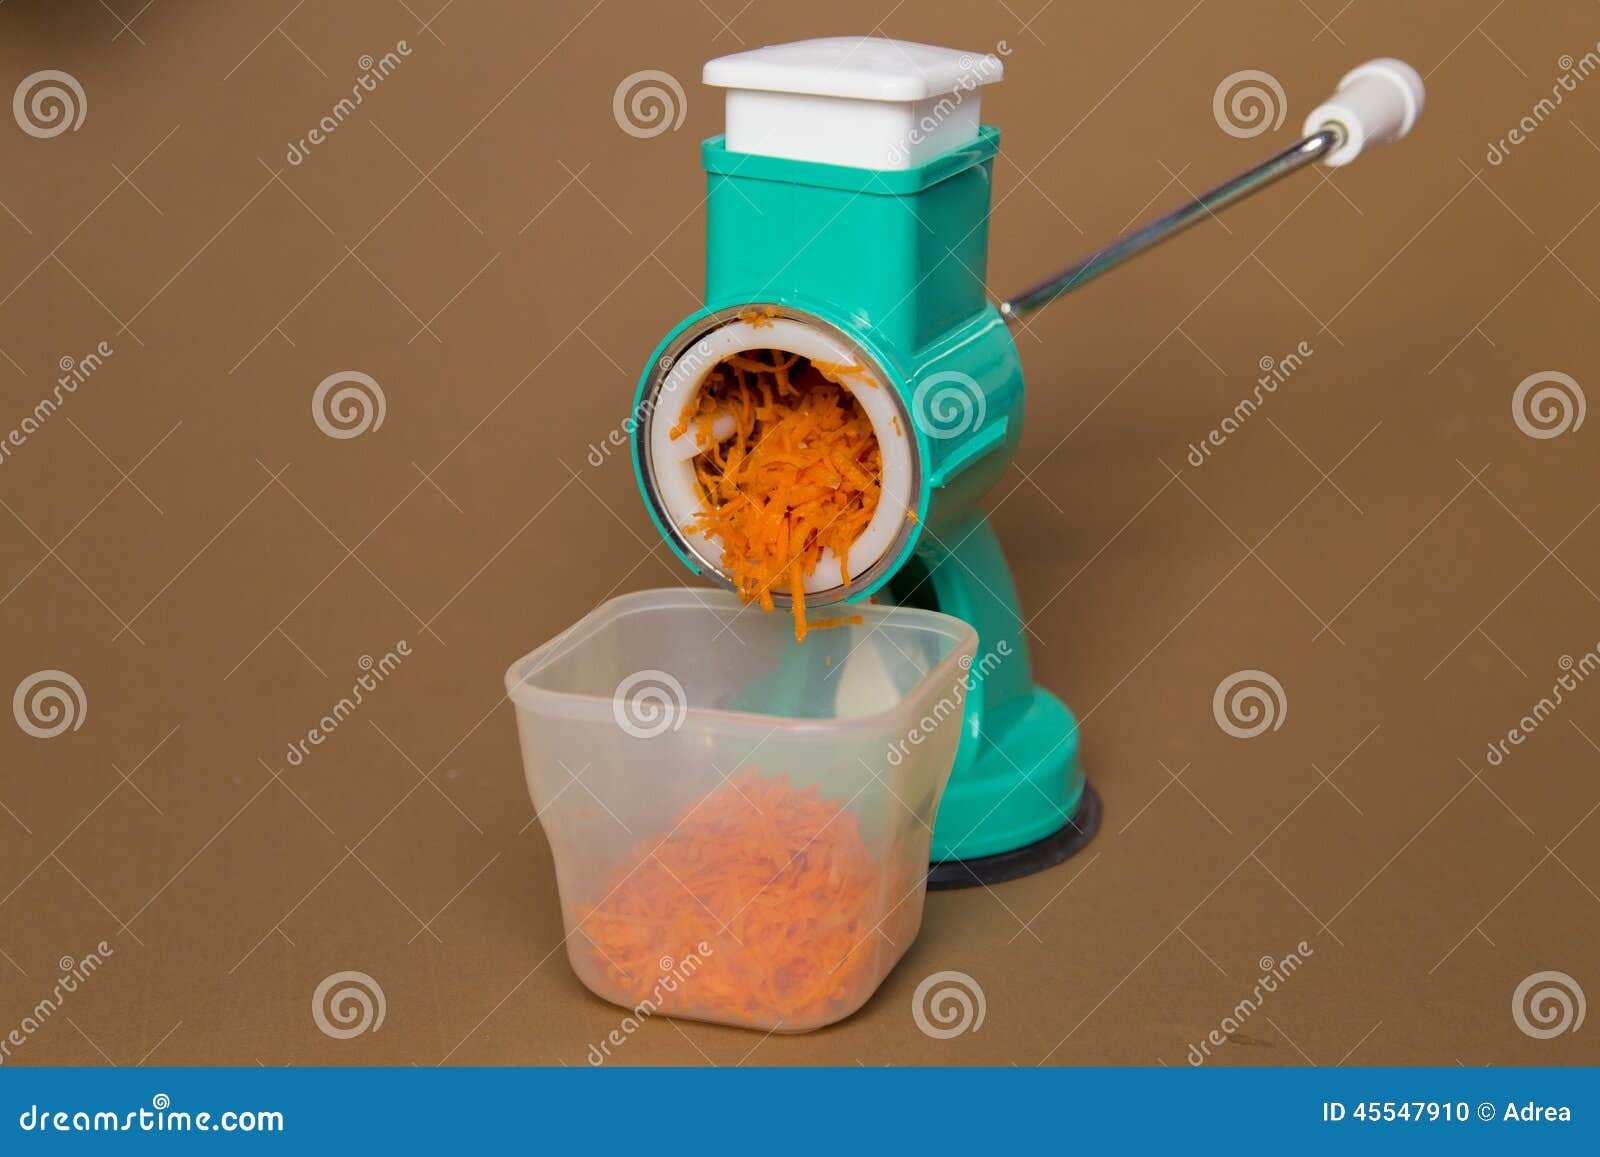 carrot grater with a bole 